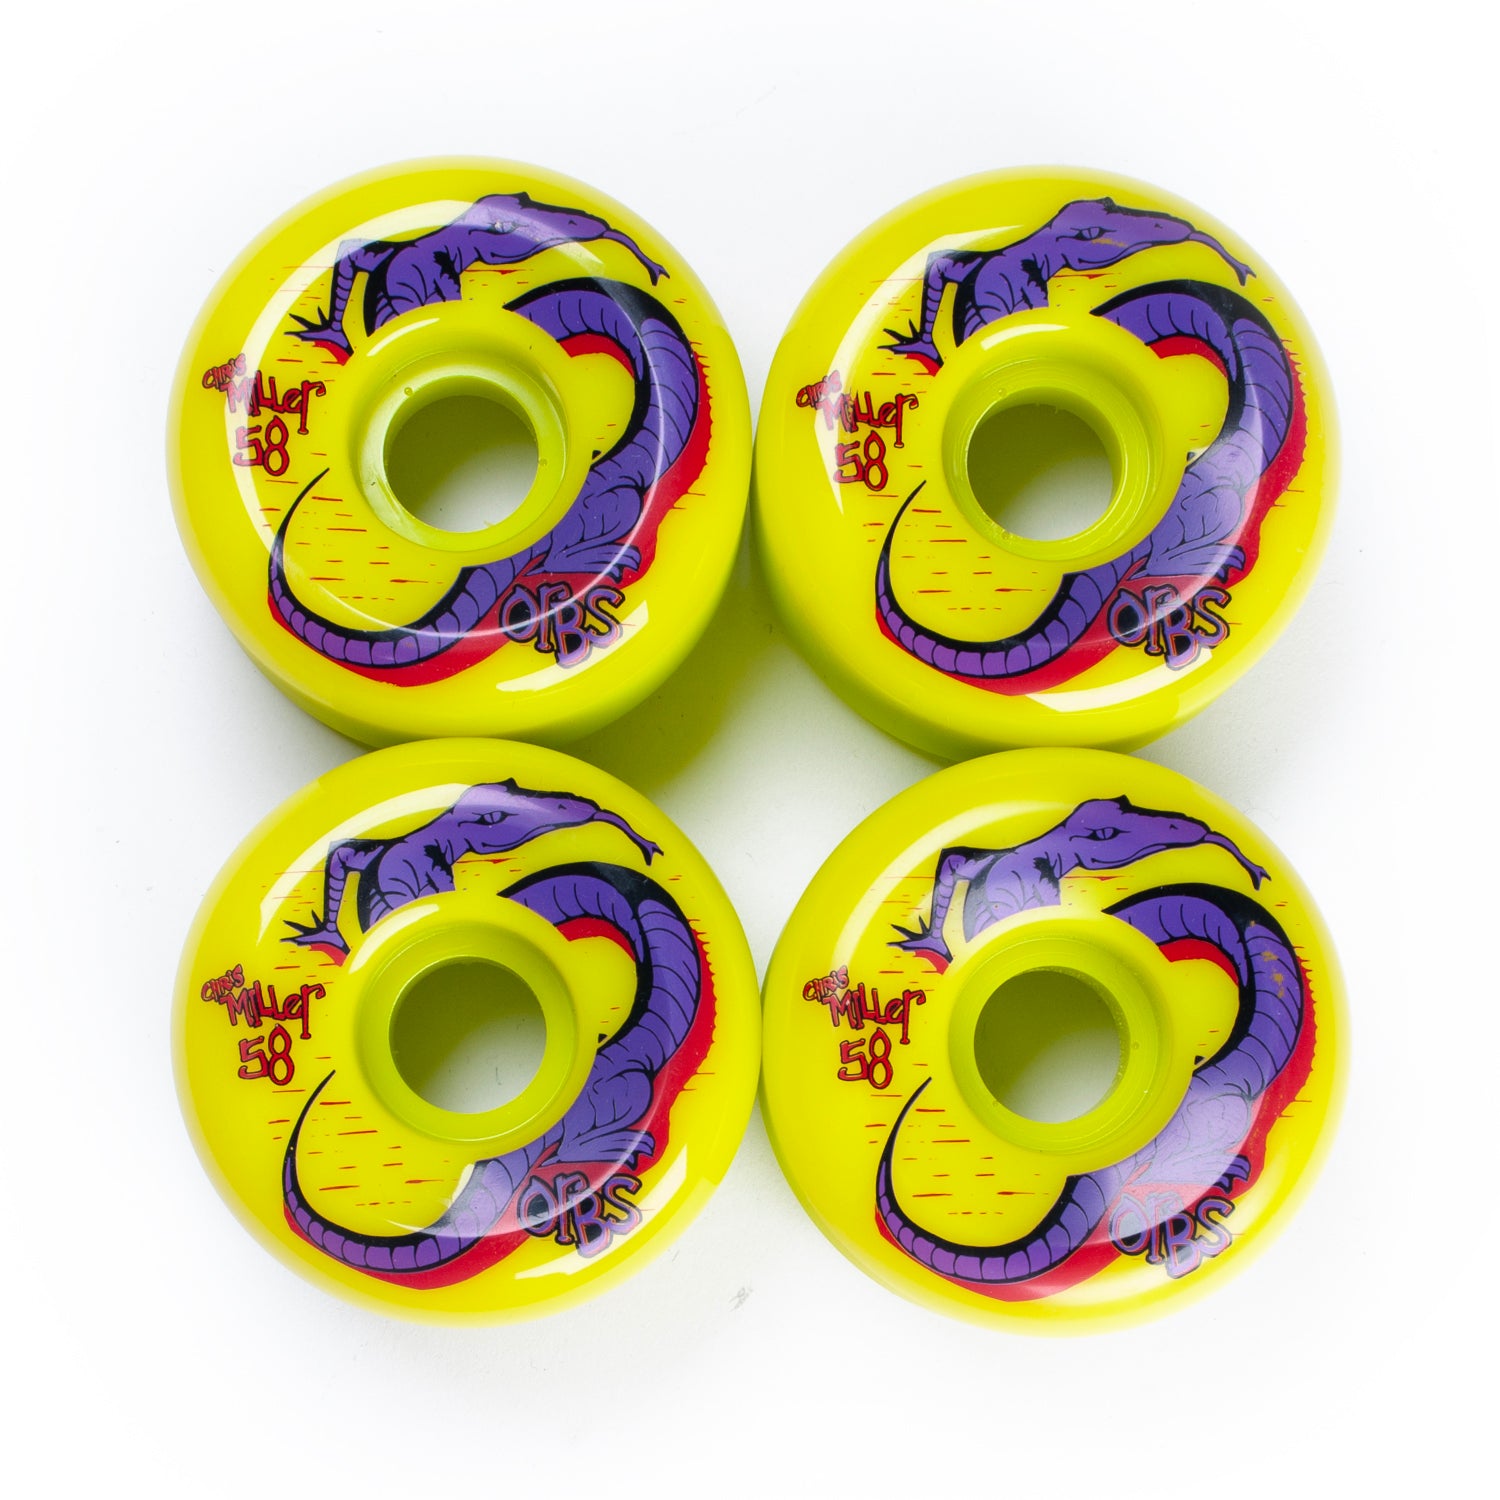 Chris Miller Specters - 58mm - Conical - Neon Yellow - Prime Delux Store